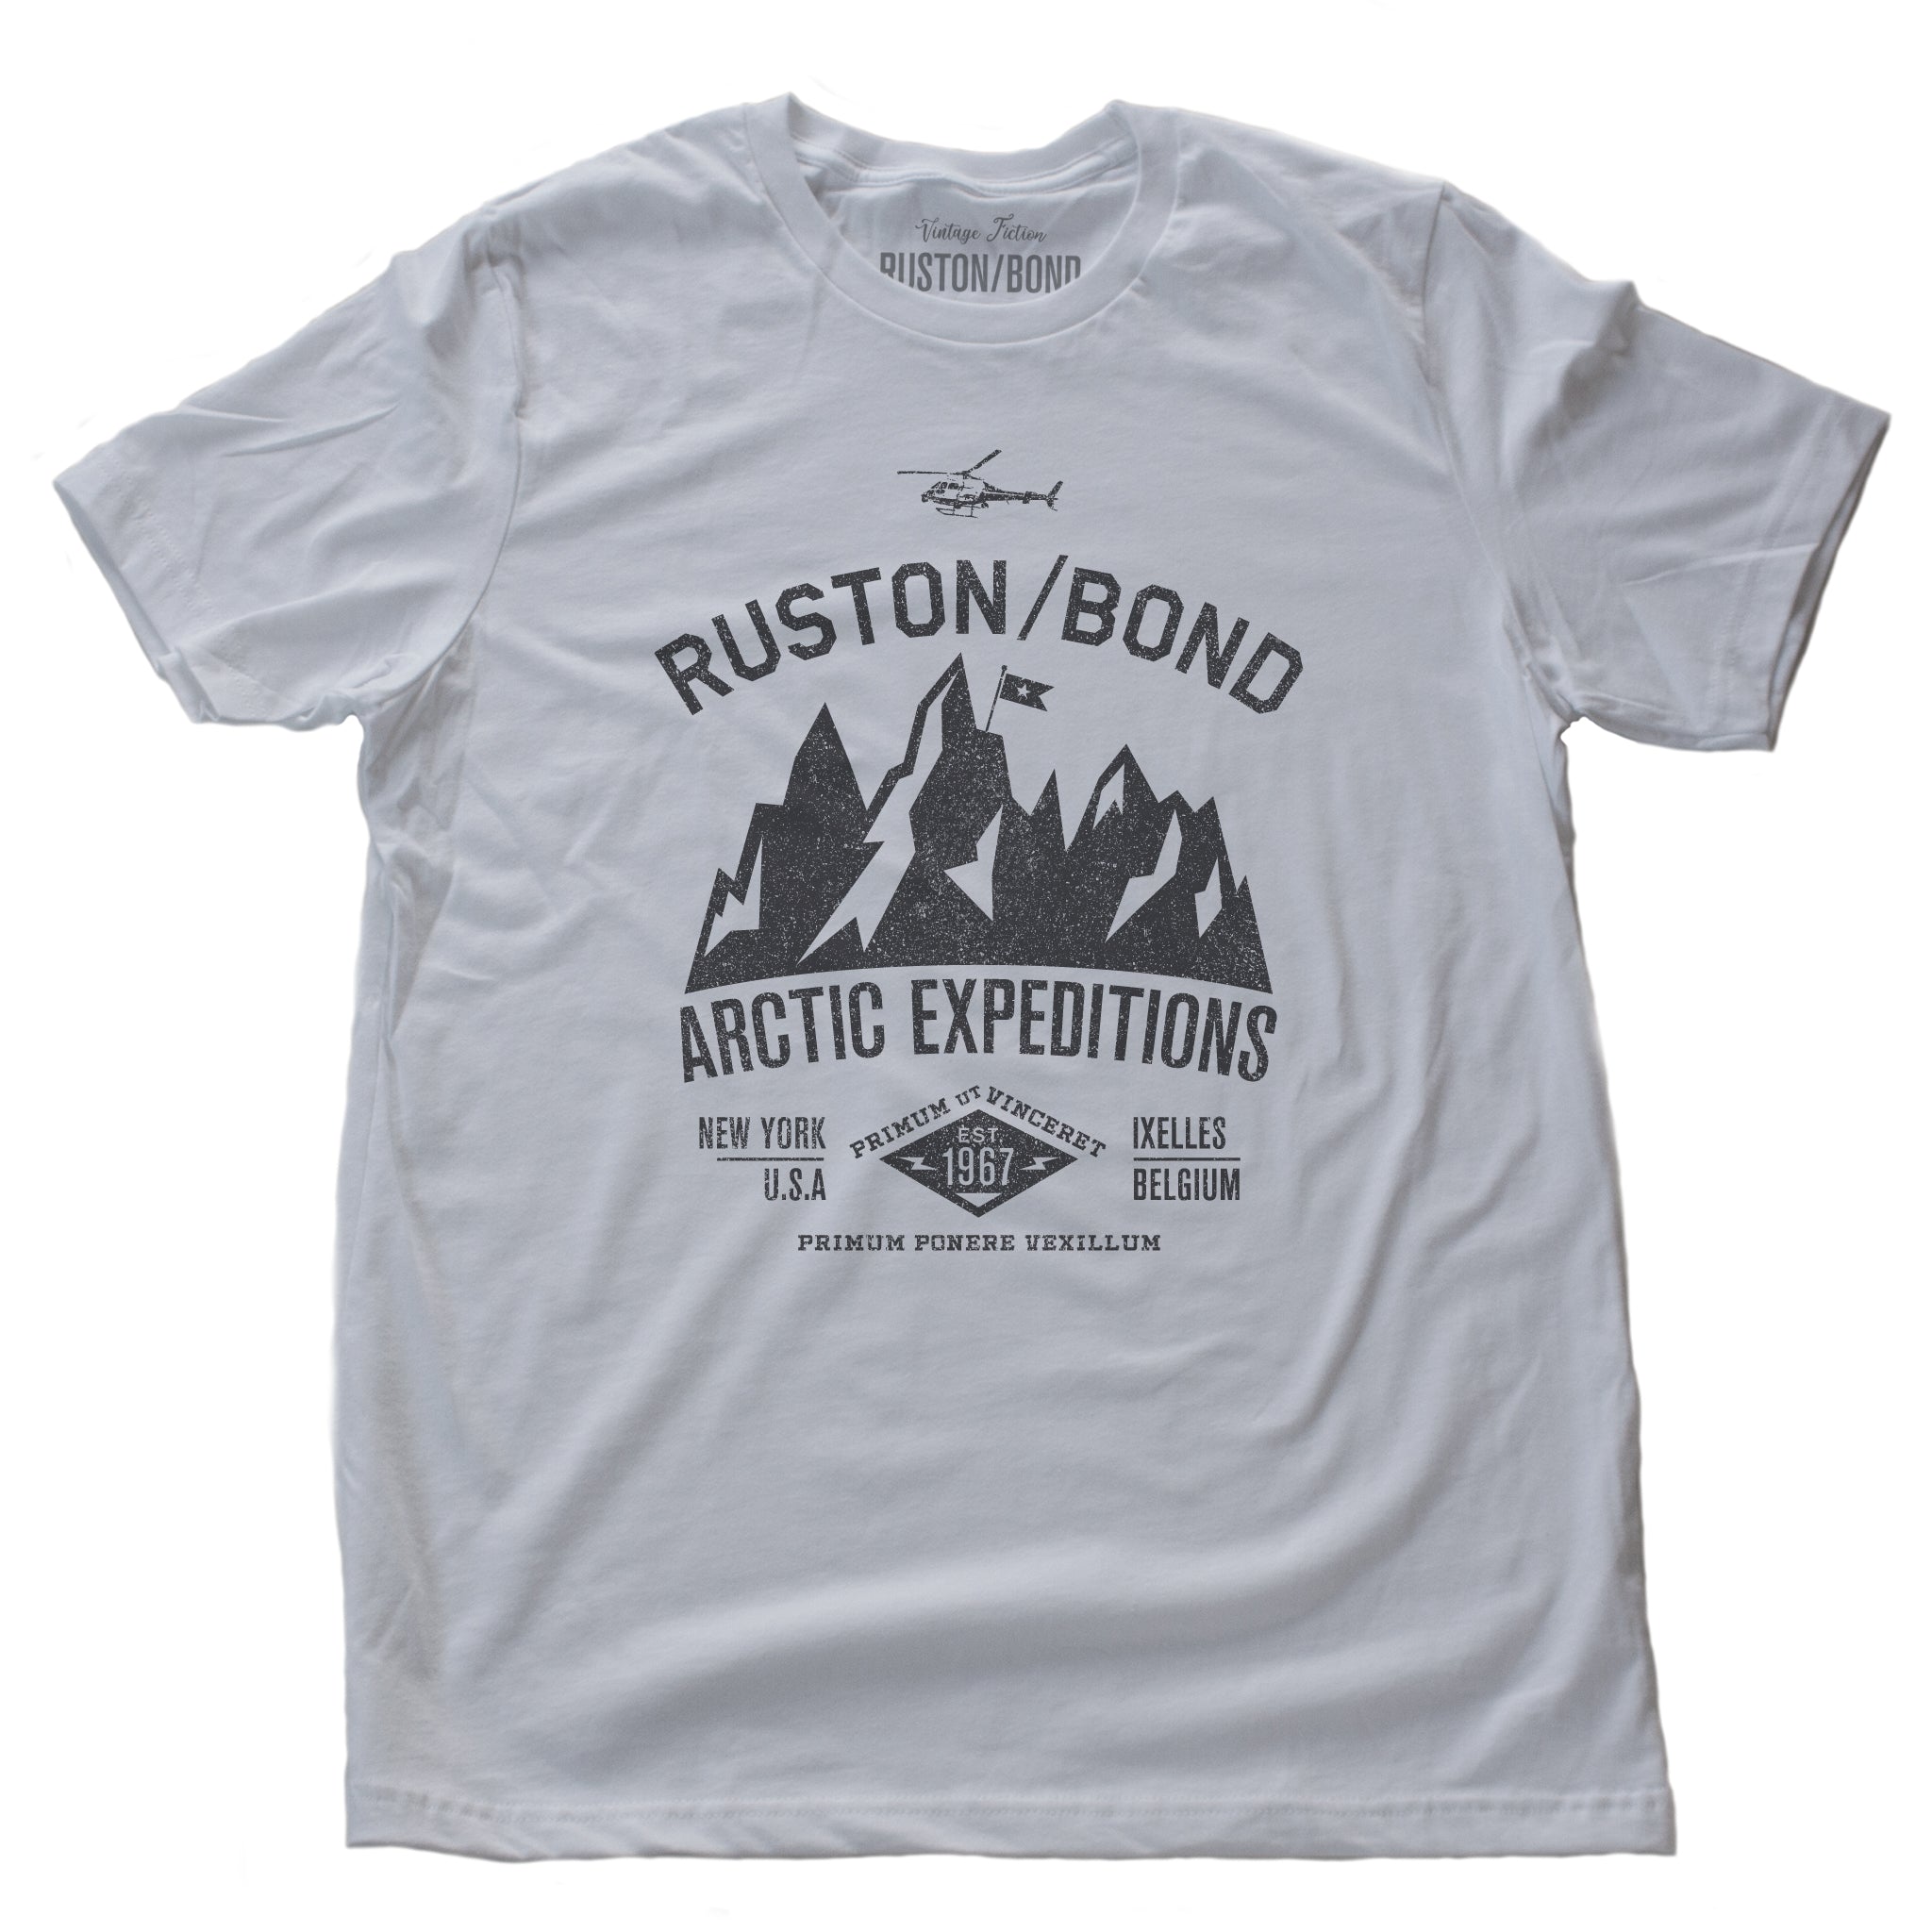 White  classic, fashion, retro inspired t-shirt, with a fictional advertisement for an adventure company called Ruston/Bond Arctic Expeditions. It shows a mountain range and a helicopter, and lists the company locations in New York City and Ixelles, Belgium, and a Latin quote.